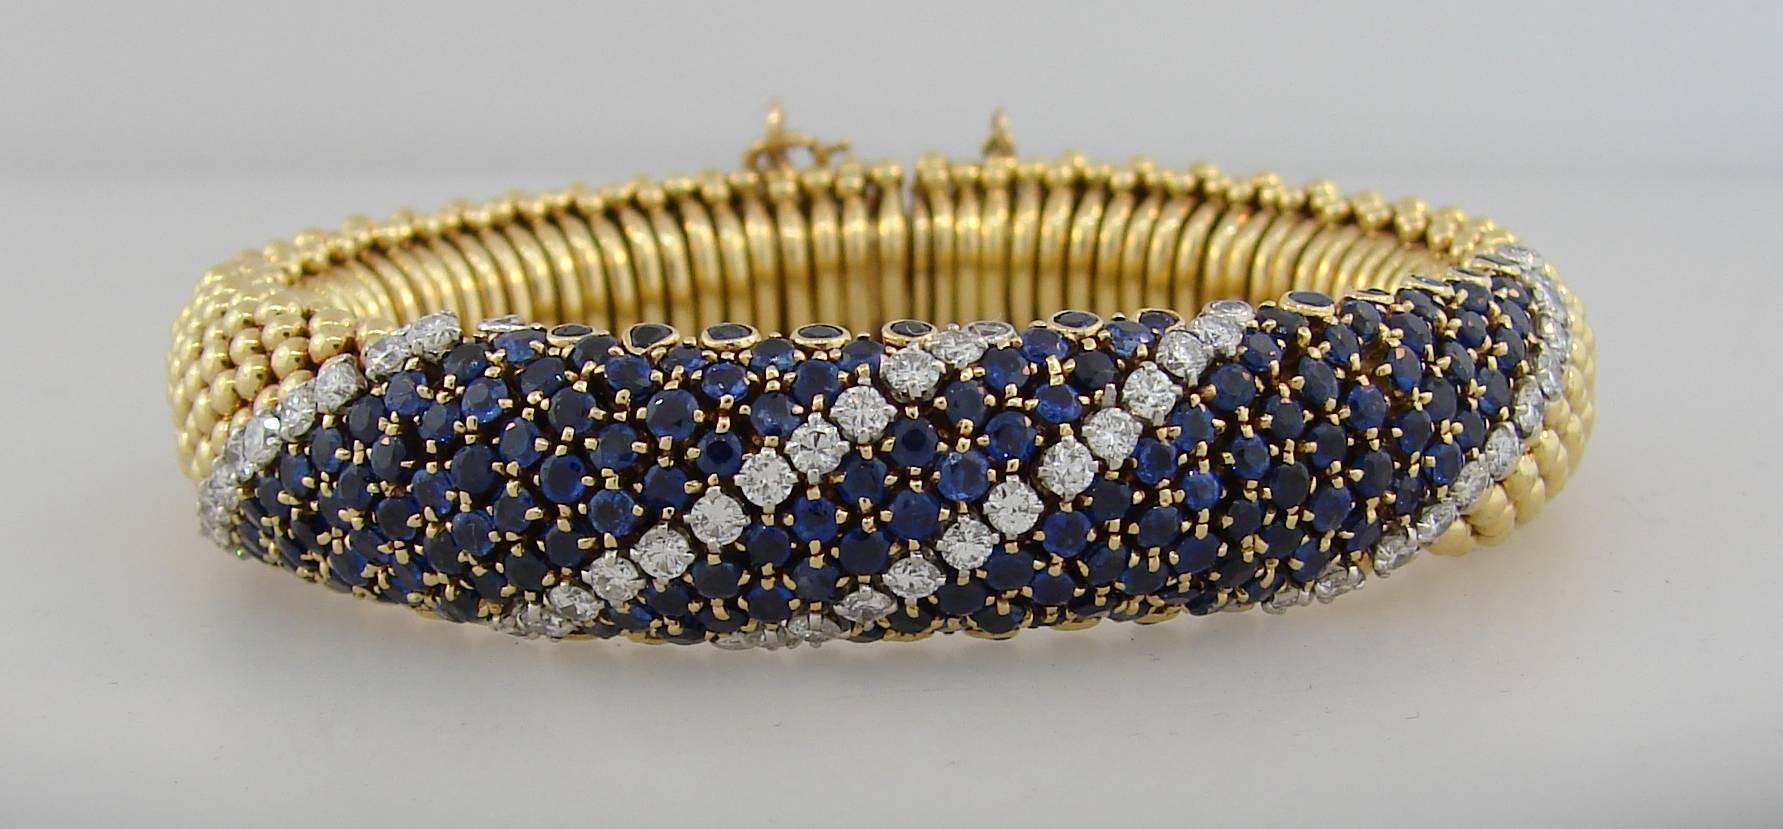 Classy and feminine bracelet created by Van Cleef & Arpels in New York in the 1950's. Tasteful color combination of yellow gold and blue sapphire accented with sparkly diamonds, volume, outstanding workmanship make the bracelet  elegant, stylish